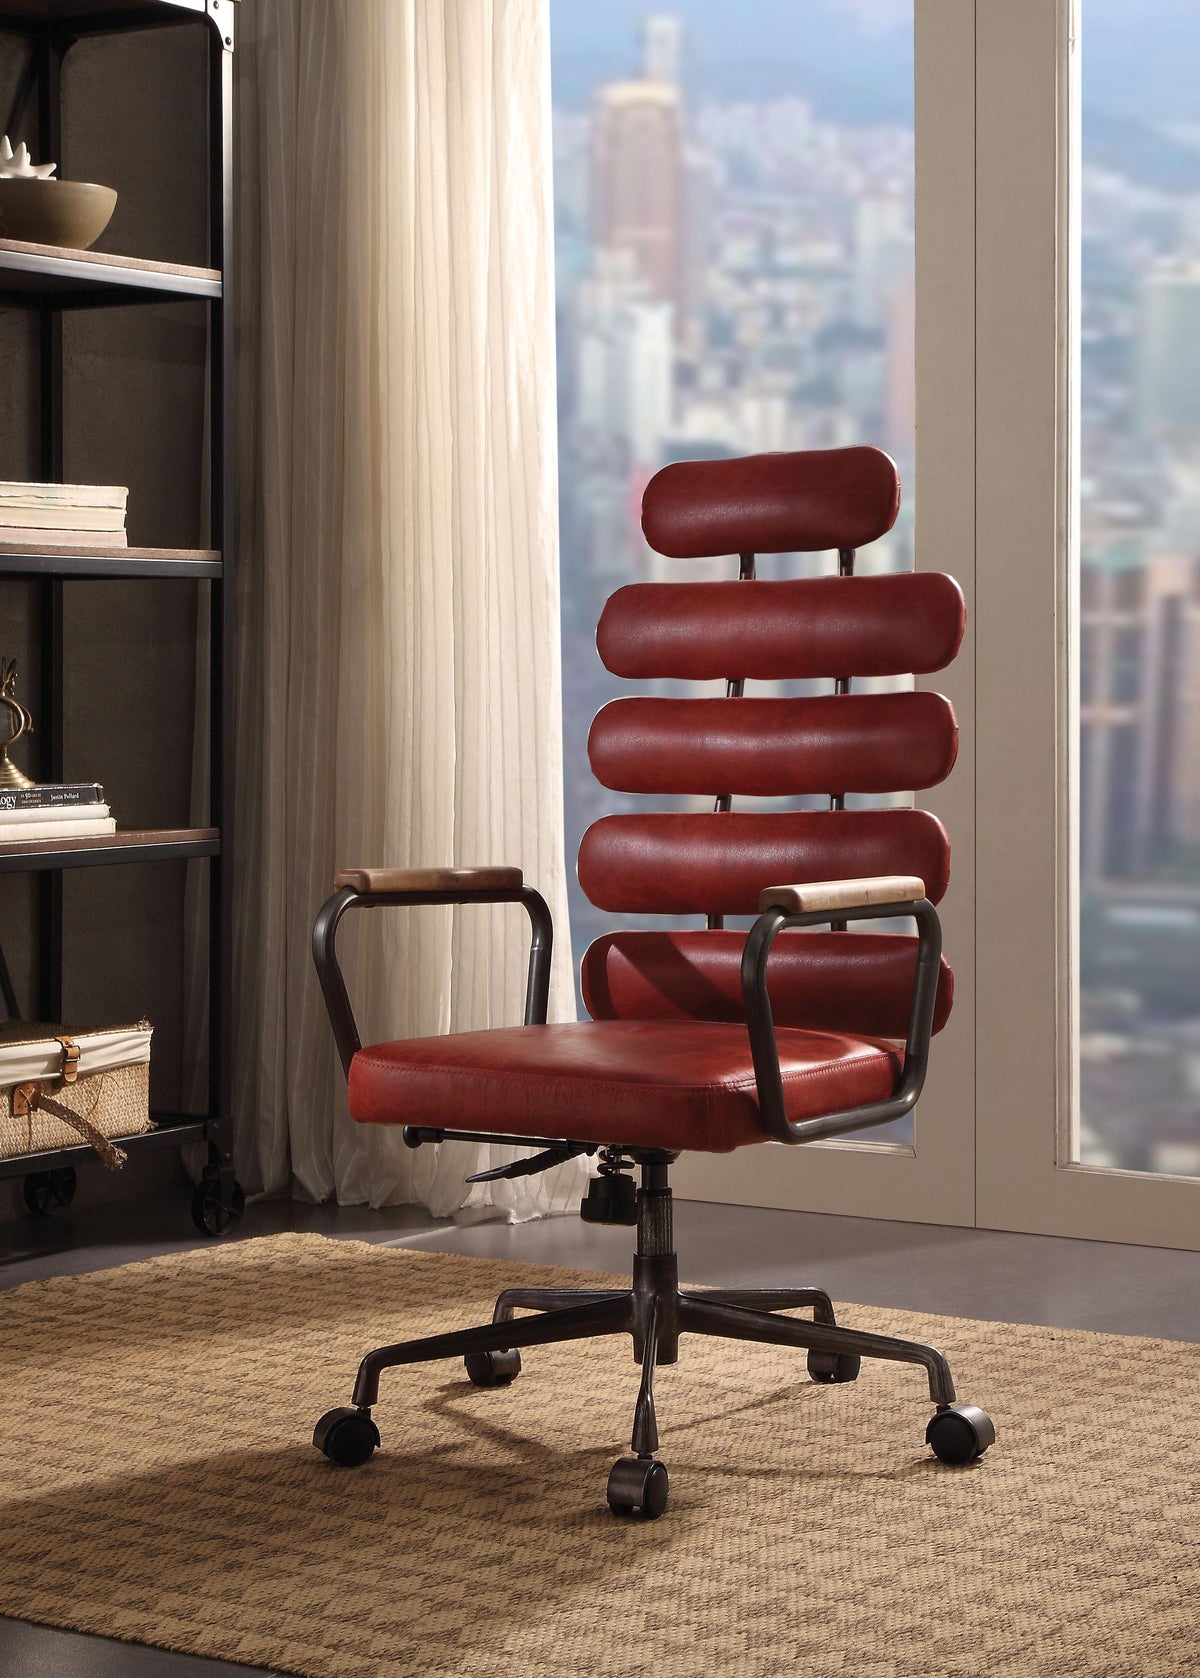 Calan Antique Red Top Grain Leather Office Chair  Las Vegas Furniture Stores